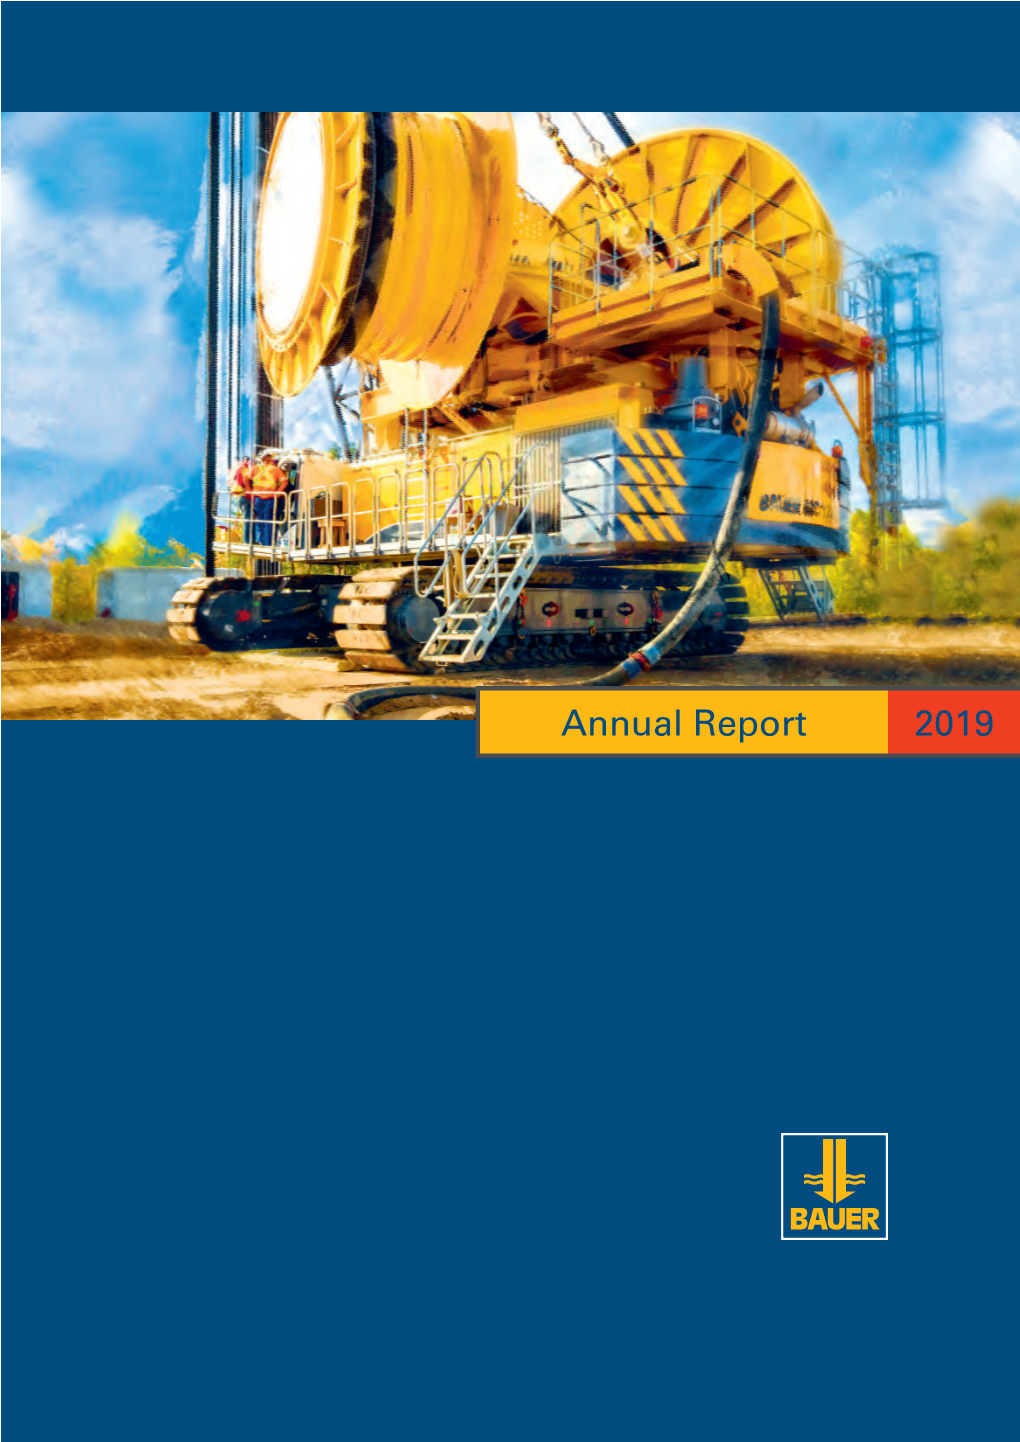 Annual Report 2019 the BAUER Group Is a Leading Provider of Services, Equipment and Products Related to Ground and Groundwater